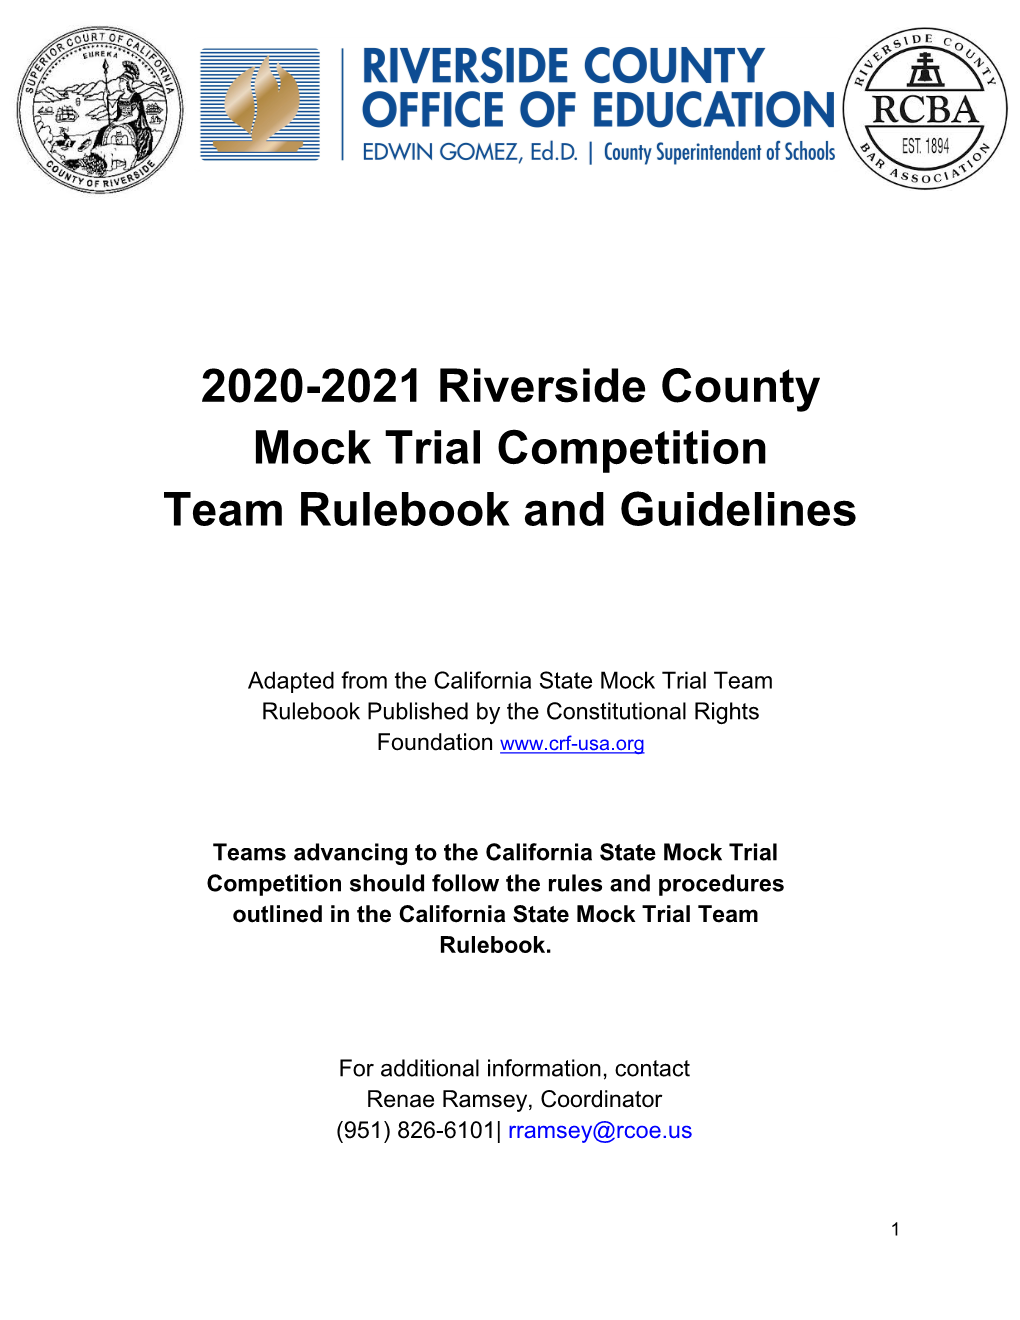 2020-2021 Riverside County Mock Trial Competition Team Rulebook and Guidelines